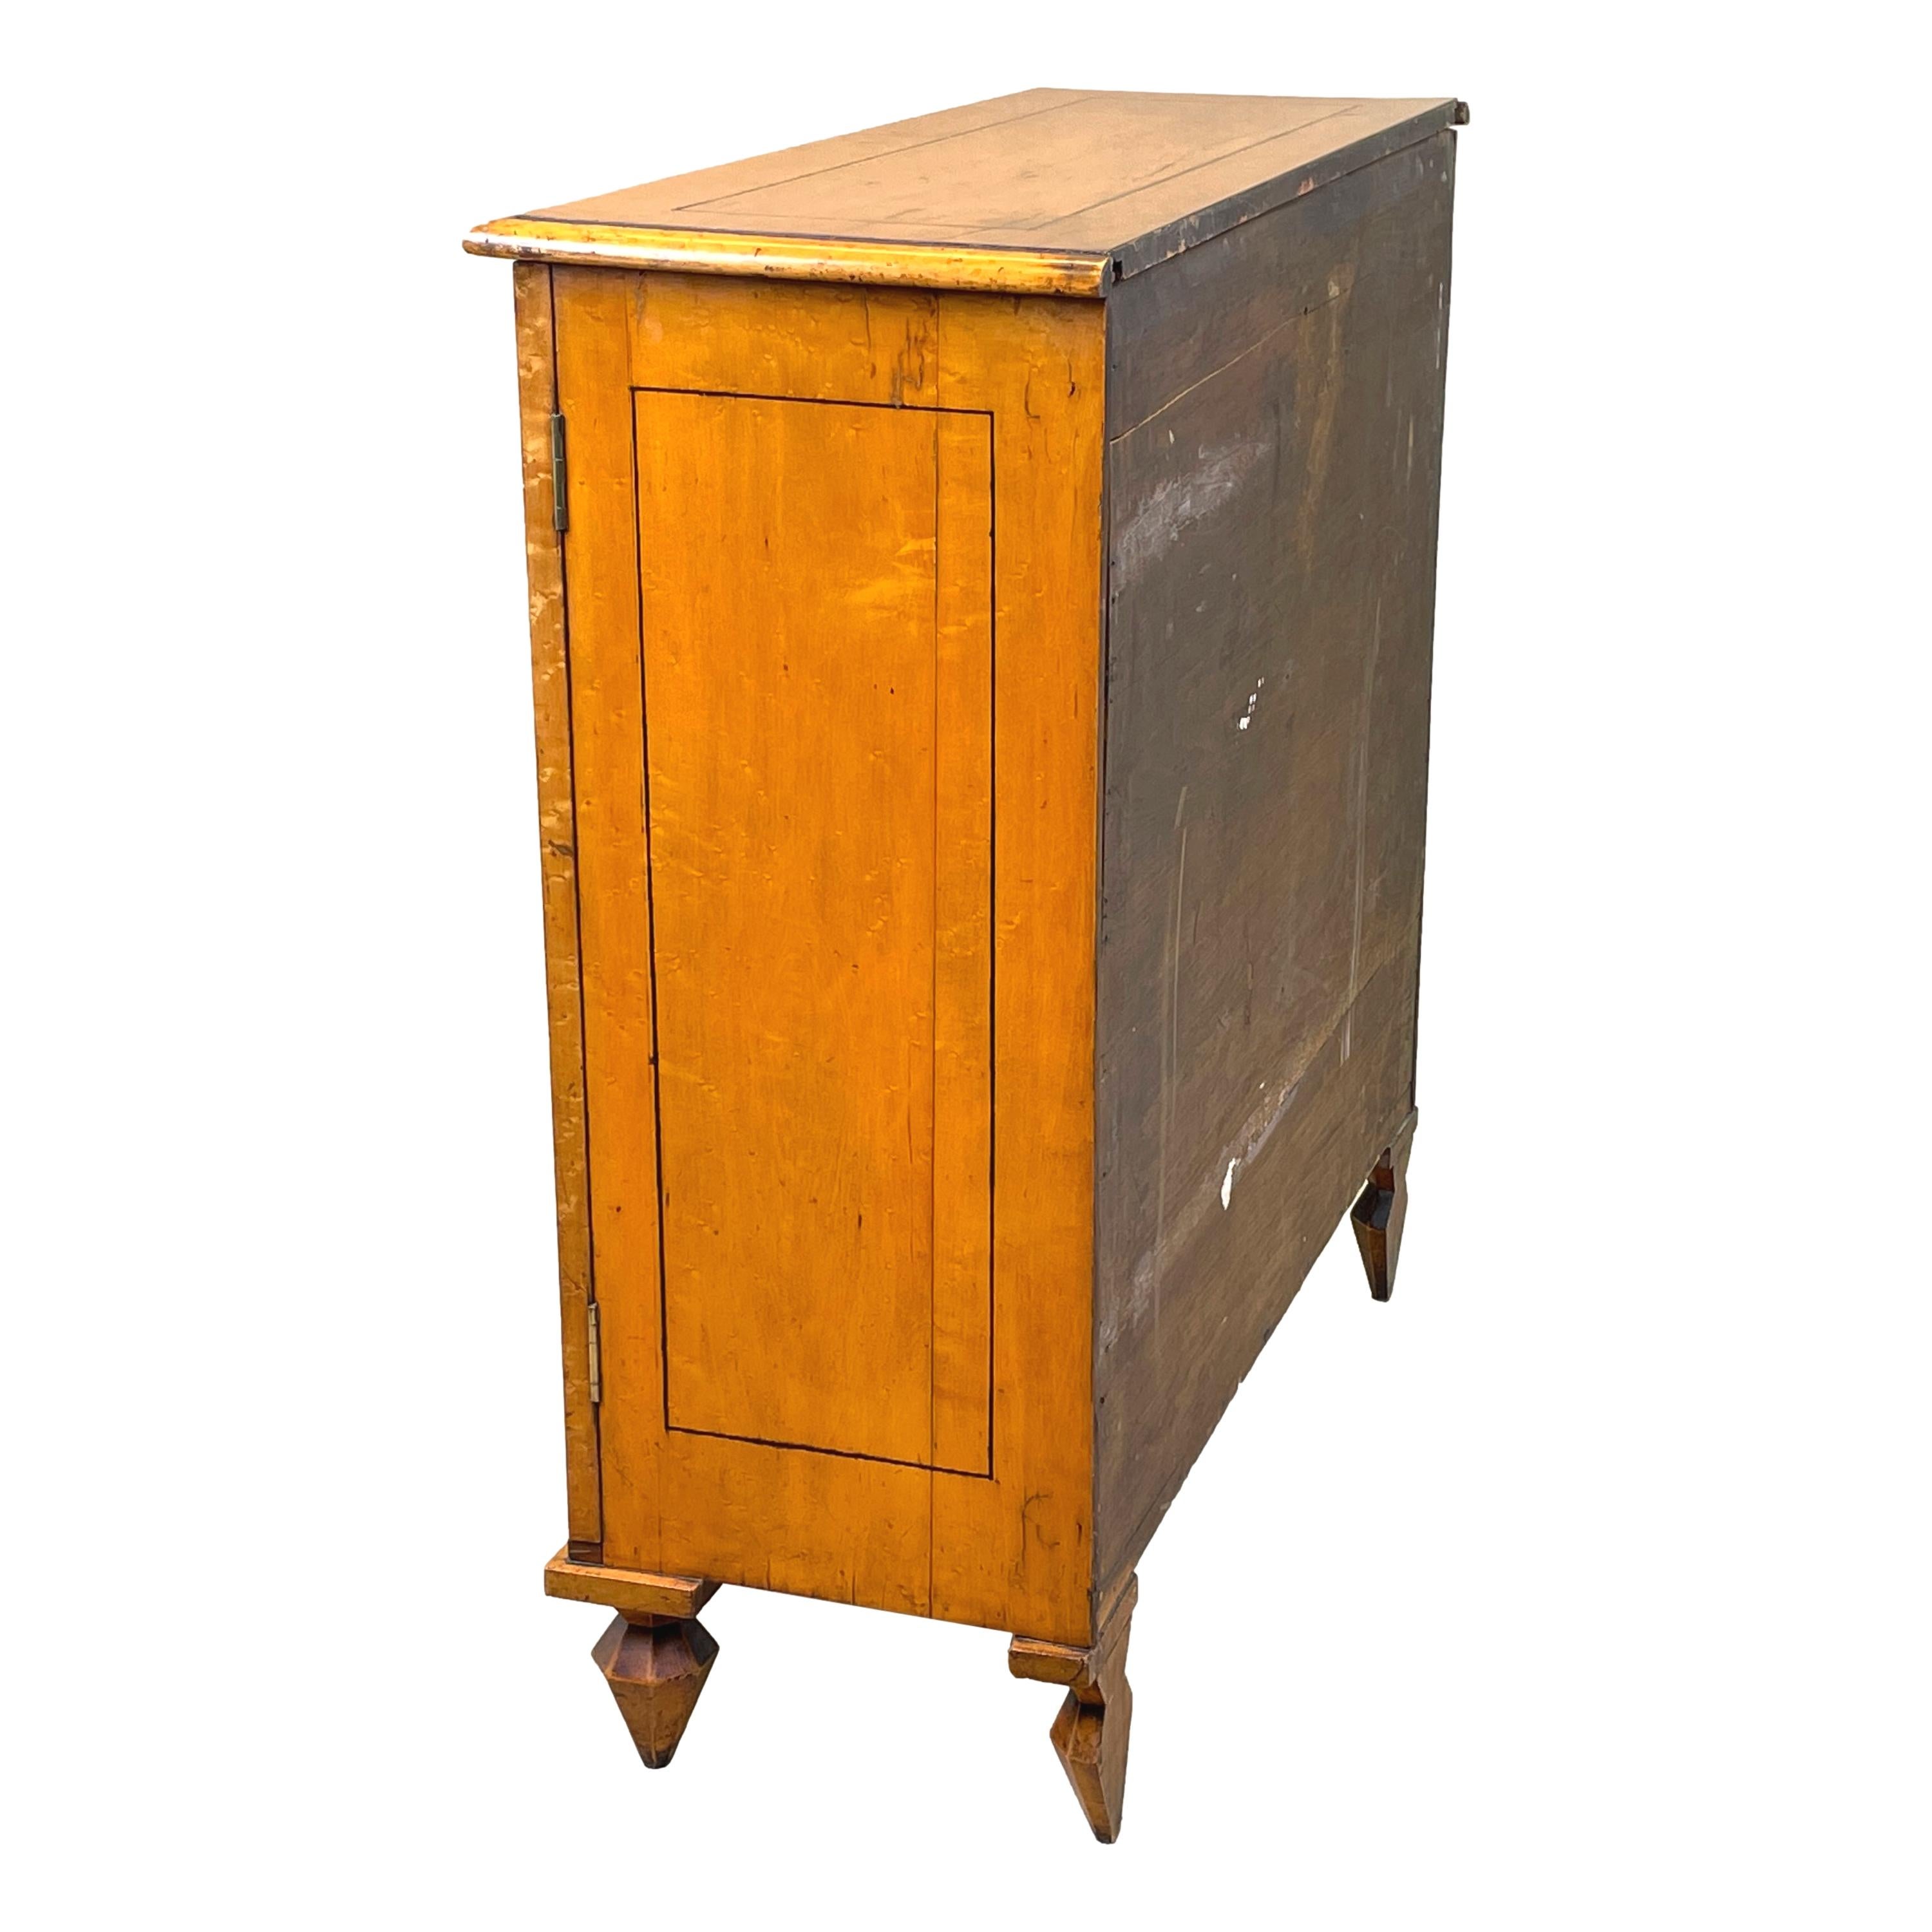 19th Century Birdseye Maple Cupboard In Good Condition For Sale In Bedfordshire, GB